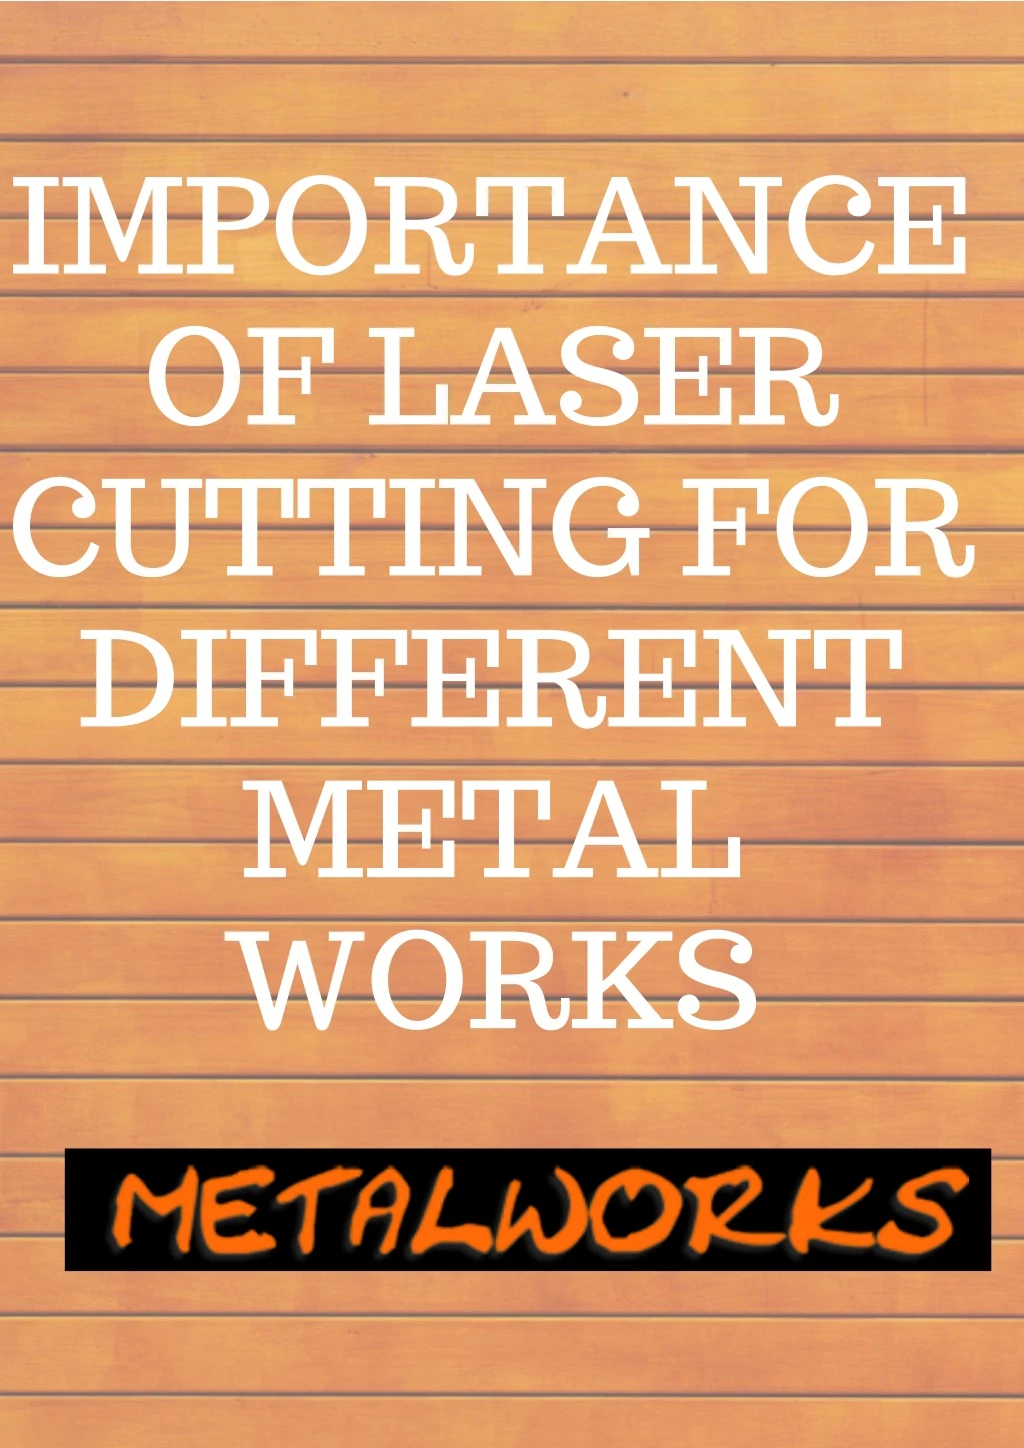 importance of laser cutting for different metal